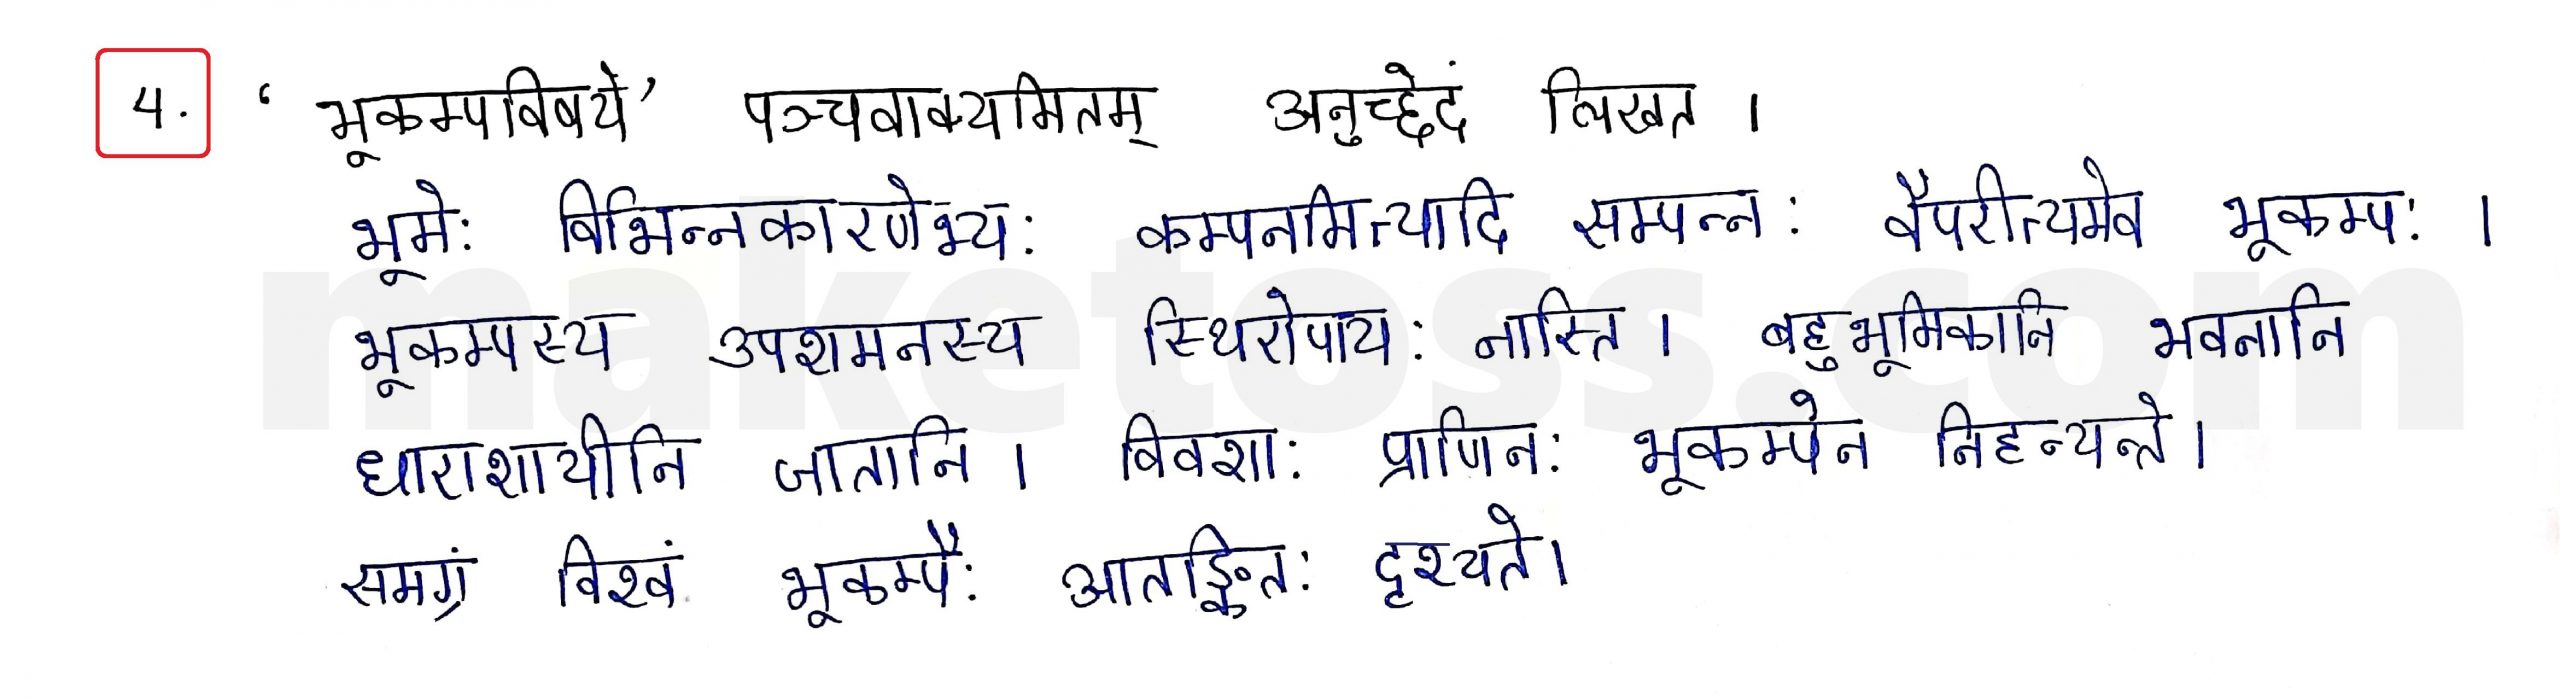 Sanskrit Class 10 - Chapter 10 - भूकंपविभीषिका Question 4 with Answer